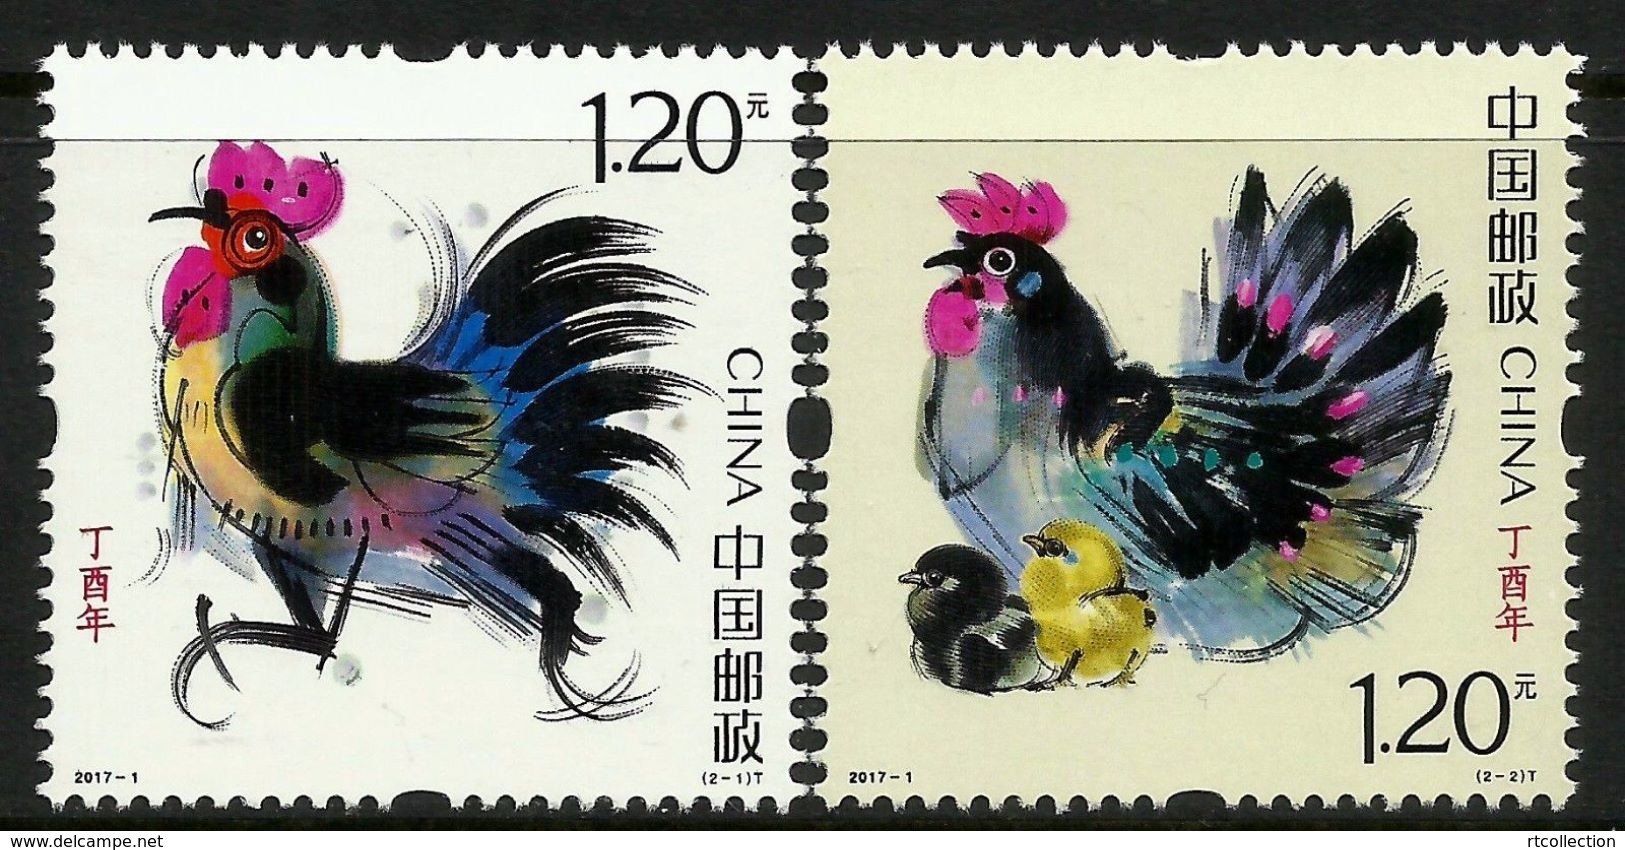 China 2017 - A Set Of 2 Chinese Lunar New Year Of Rooster Zodiac Animals Cultures Celebrations Stamps MNH 2017-1 - Ferme